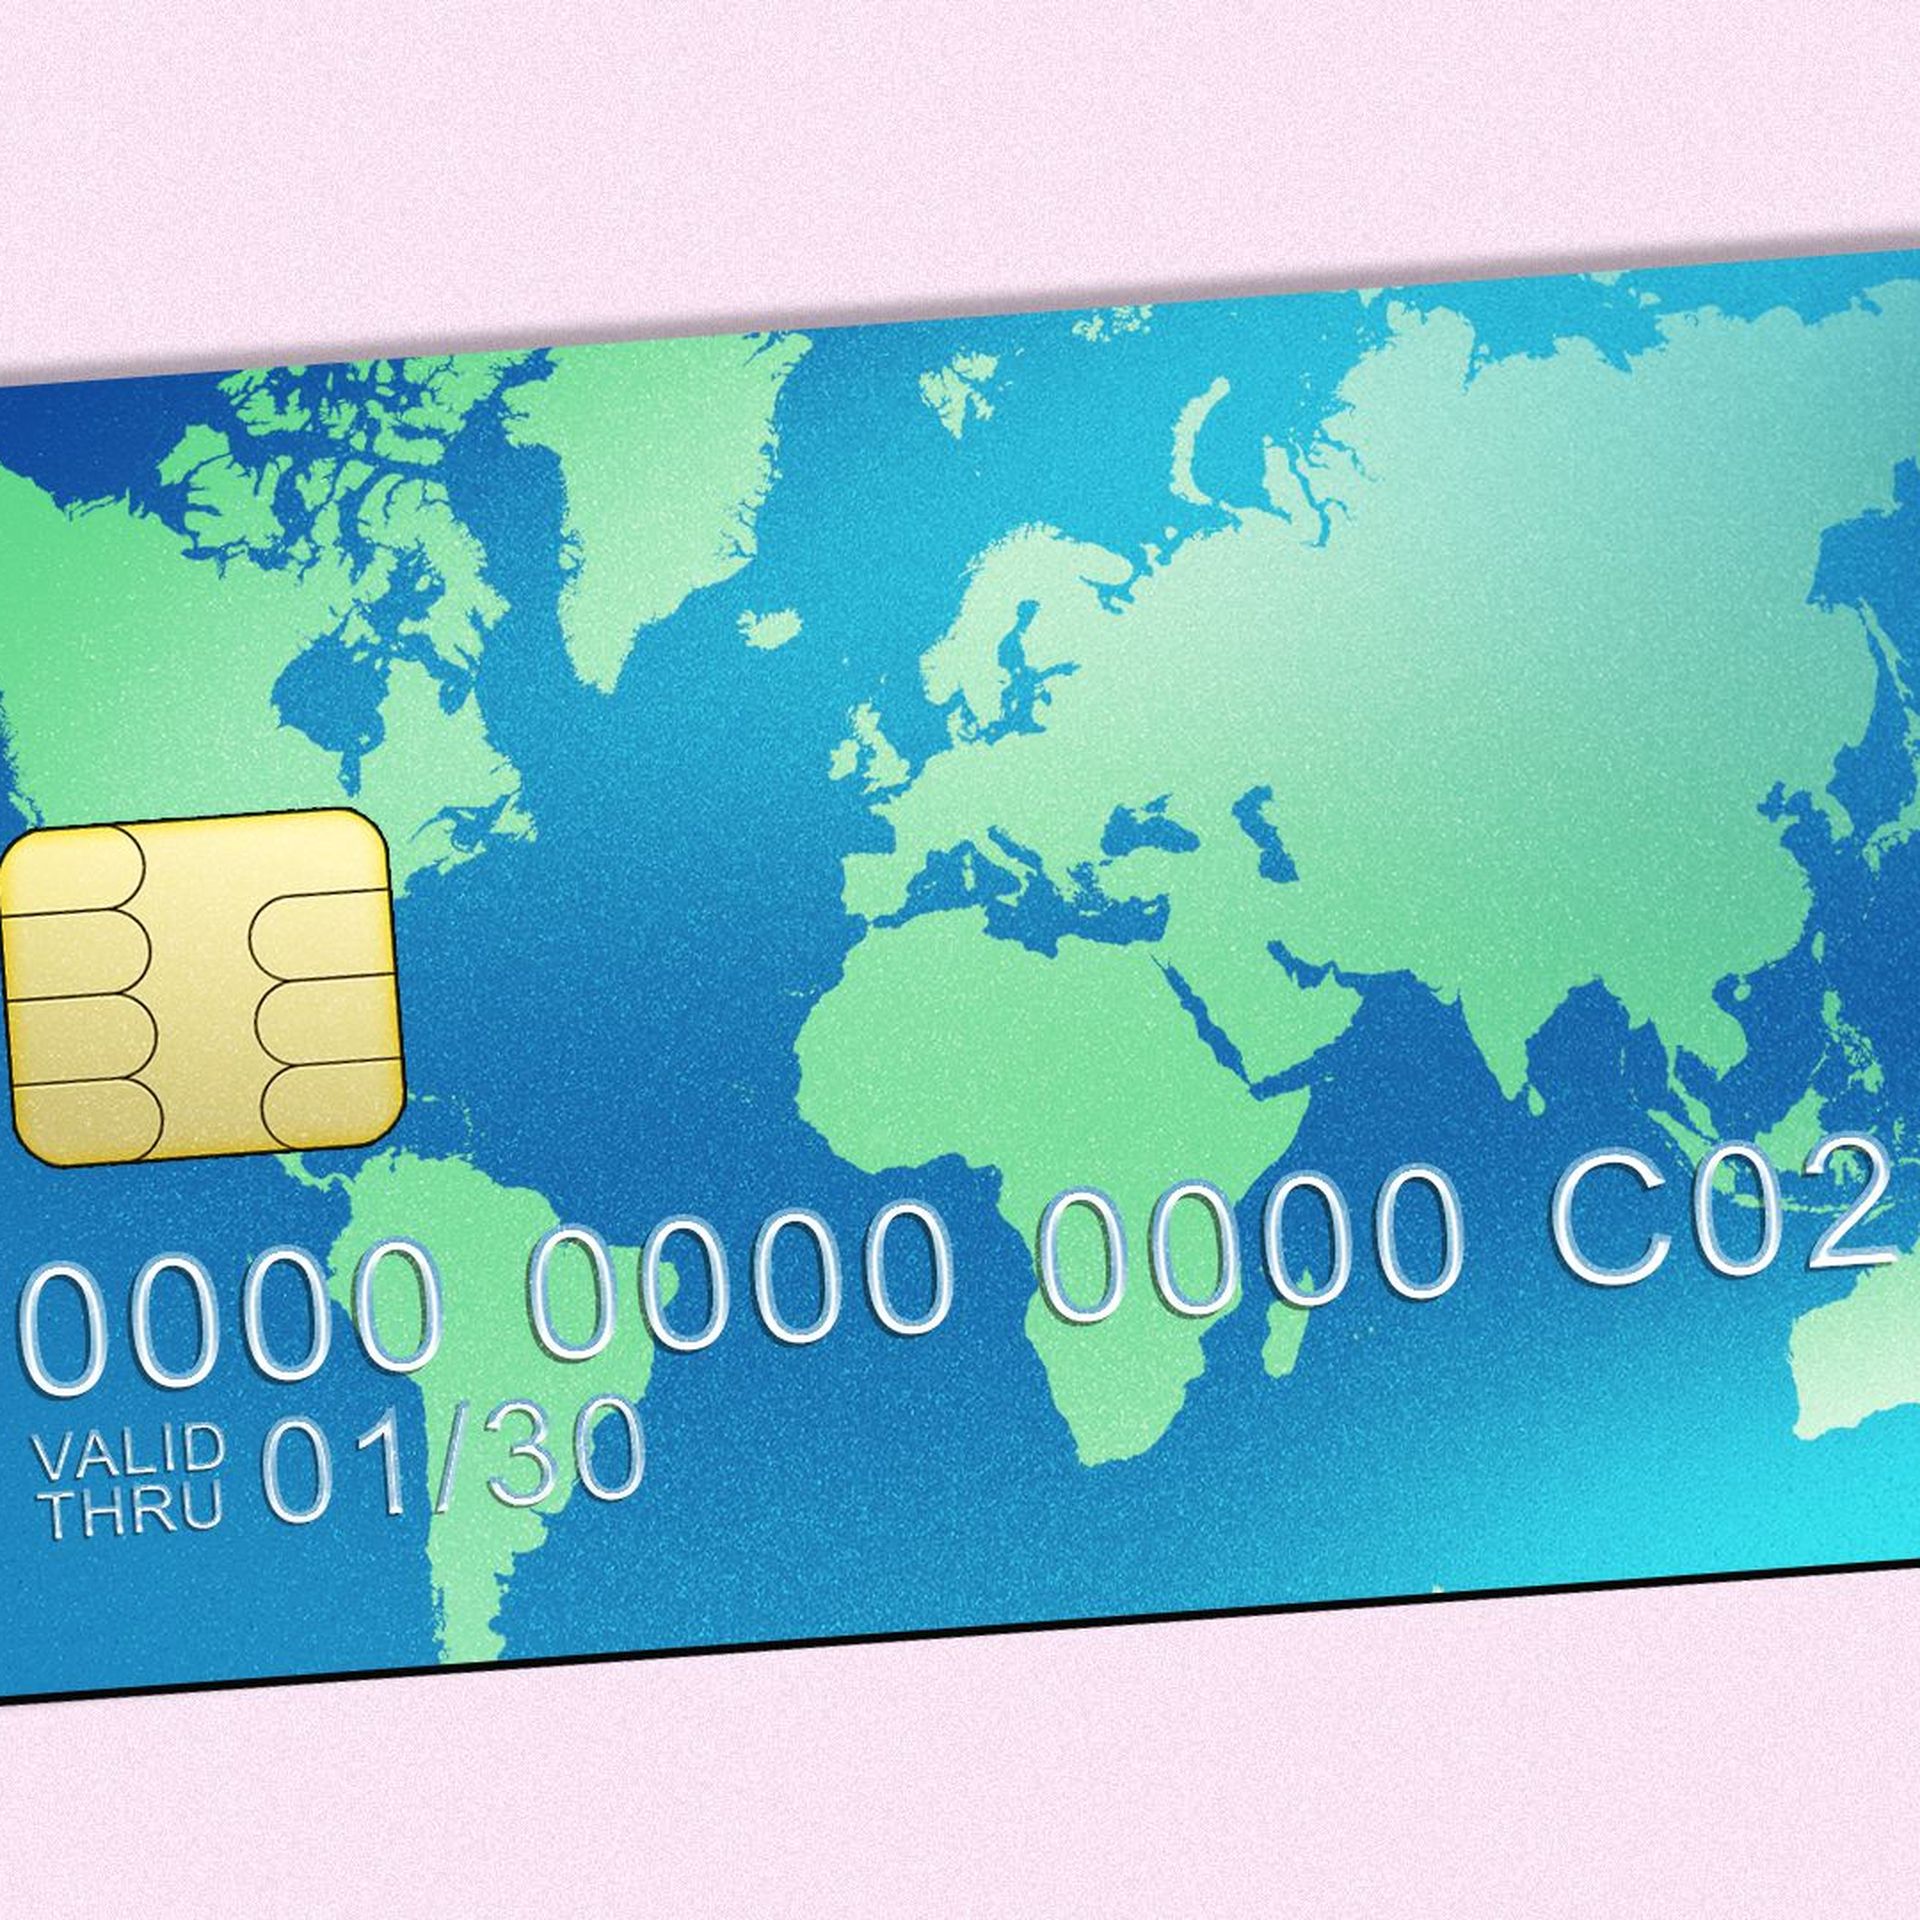 Illustration of a credit card in the shape of the world